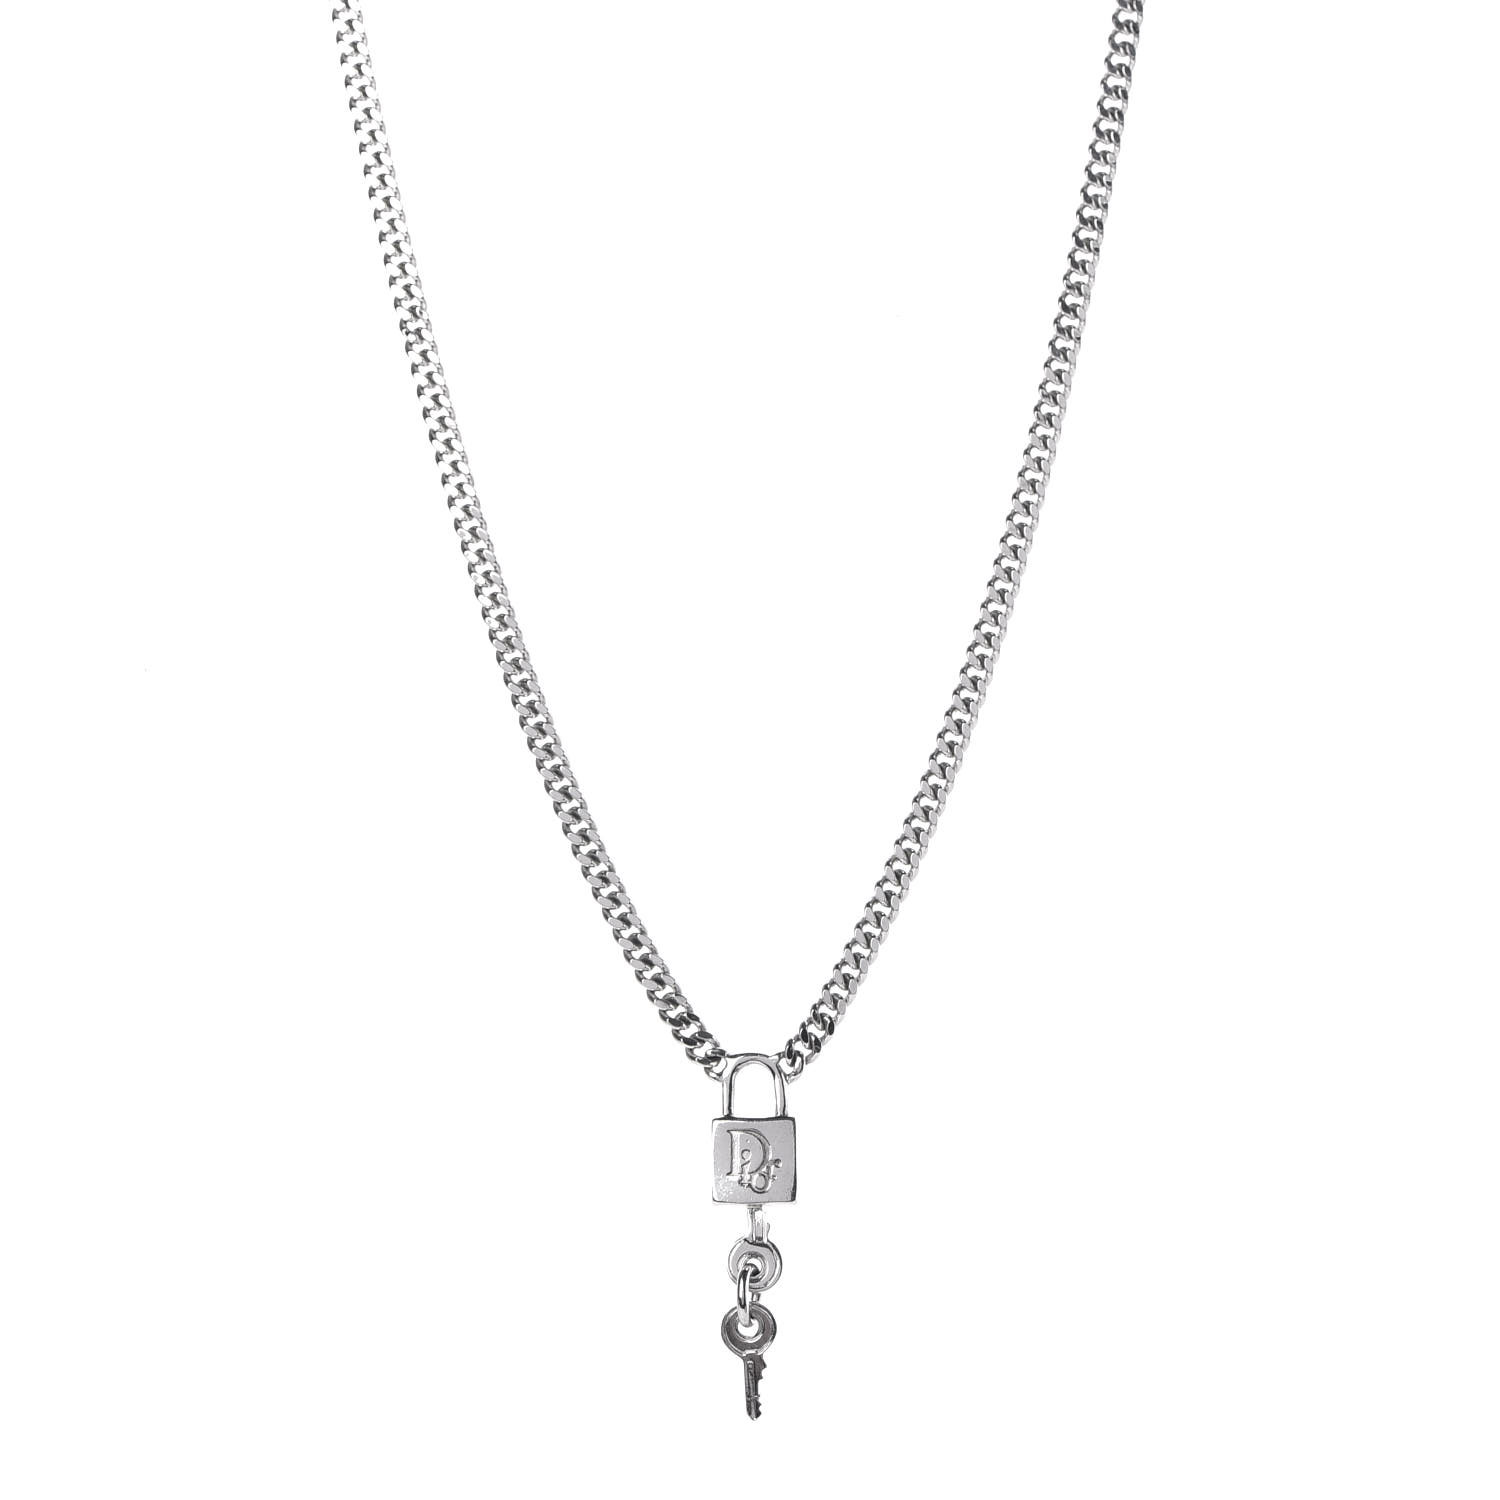 dior padlock chain necklace